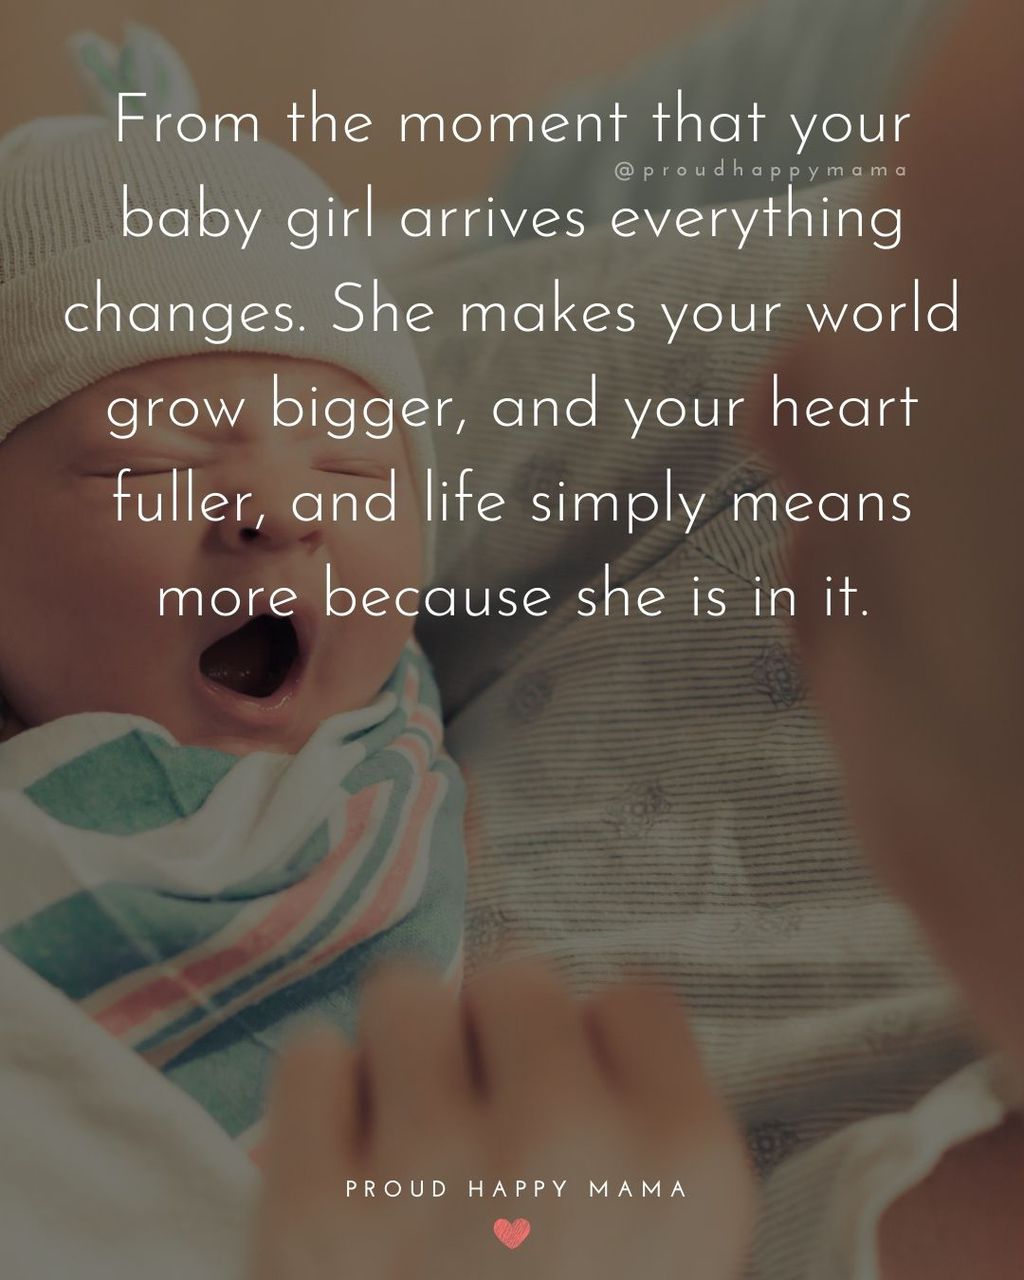 Baby Girl Quotes - From the moment that your baby girl arrives everything changes. She makes your world grow bigger, and your heart fuller, and life simply means more because she is in it.